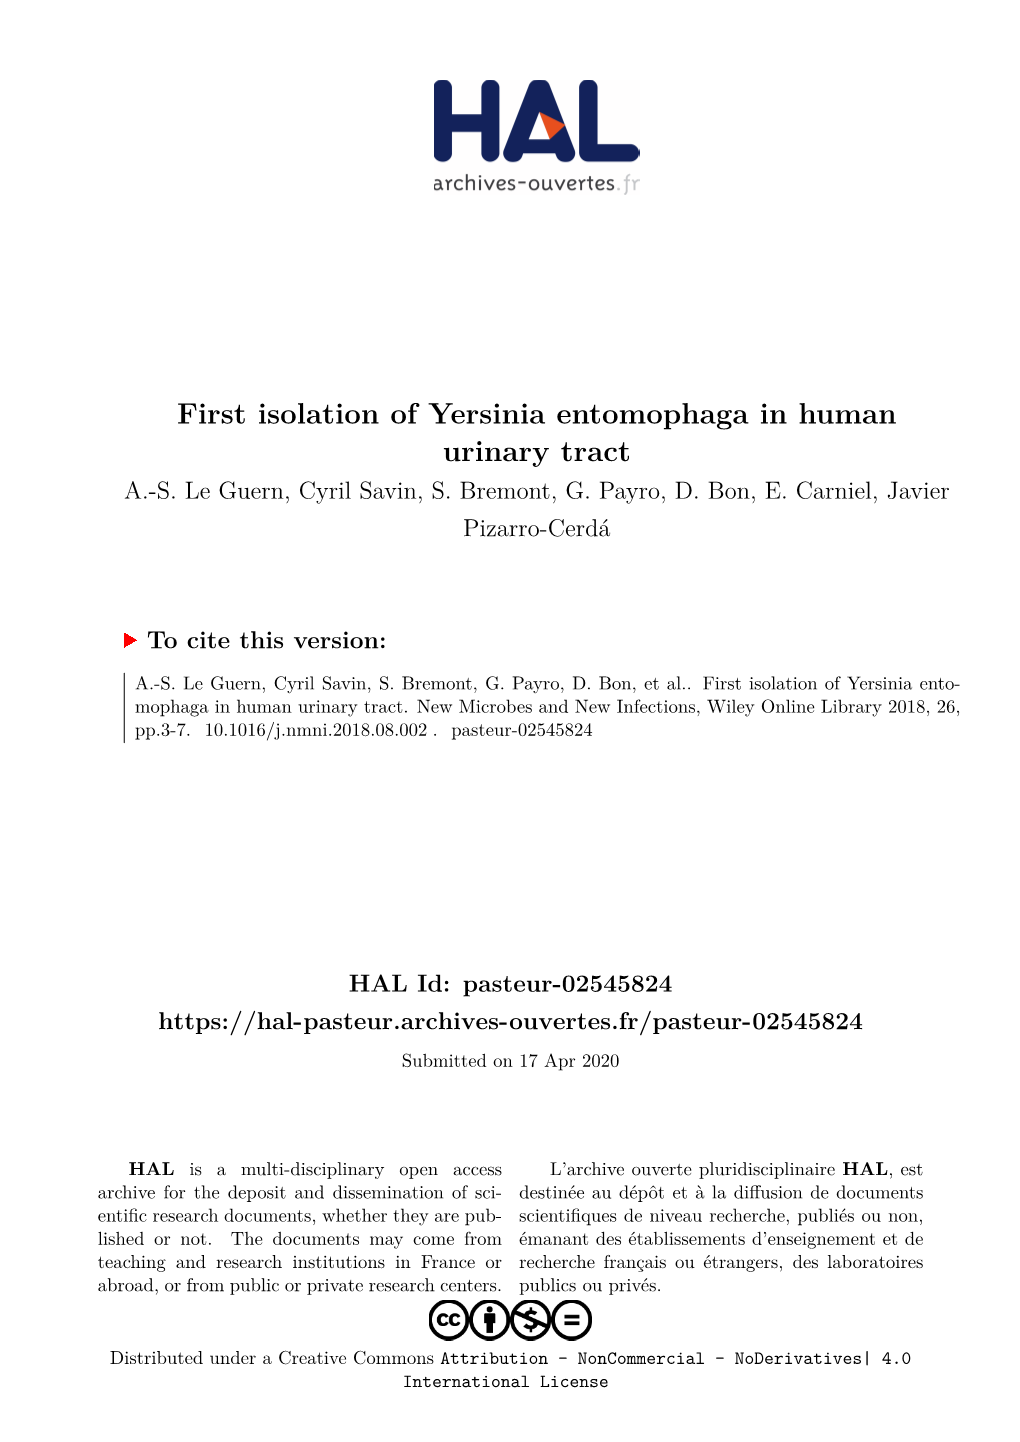 First Isolation of Yersinia Entomophaga in Human Urinary Tract A.-S